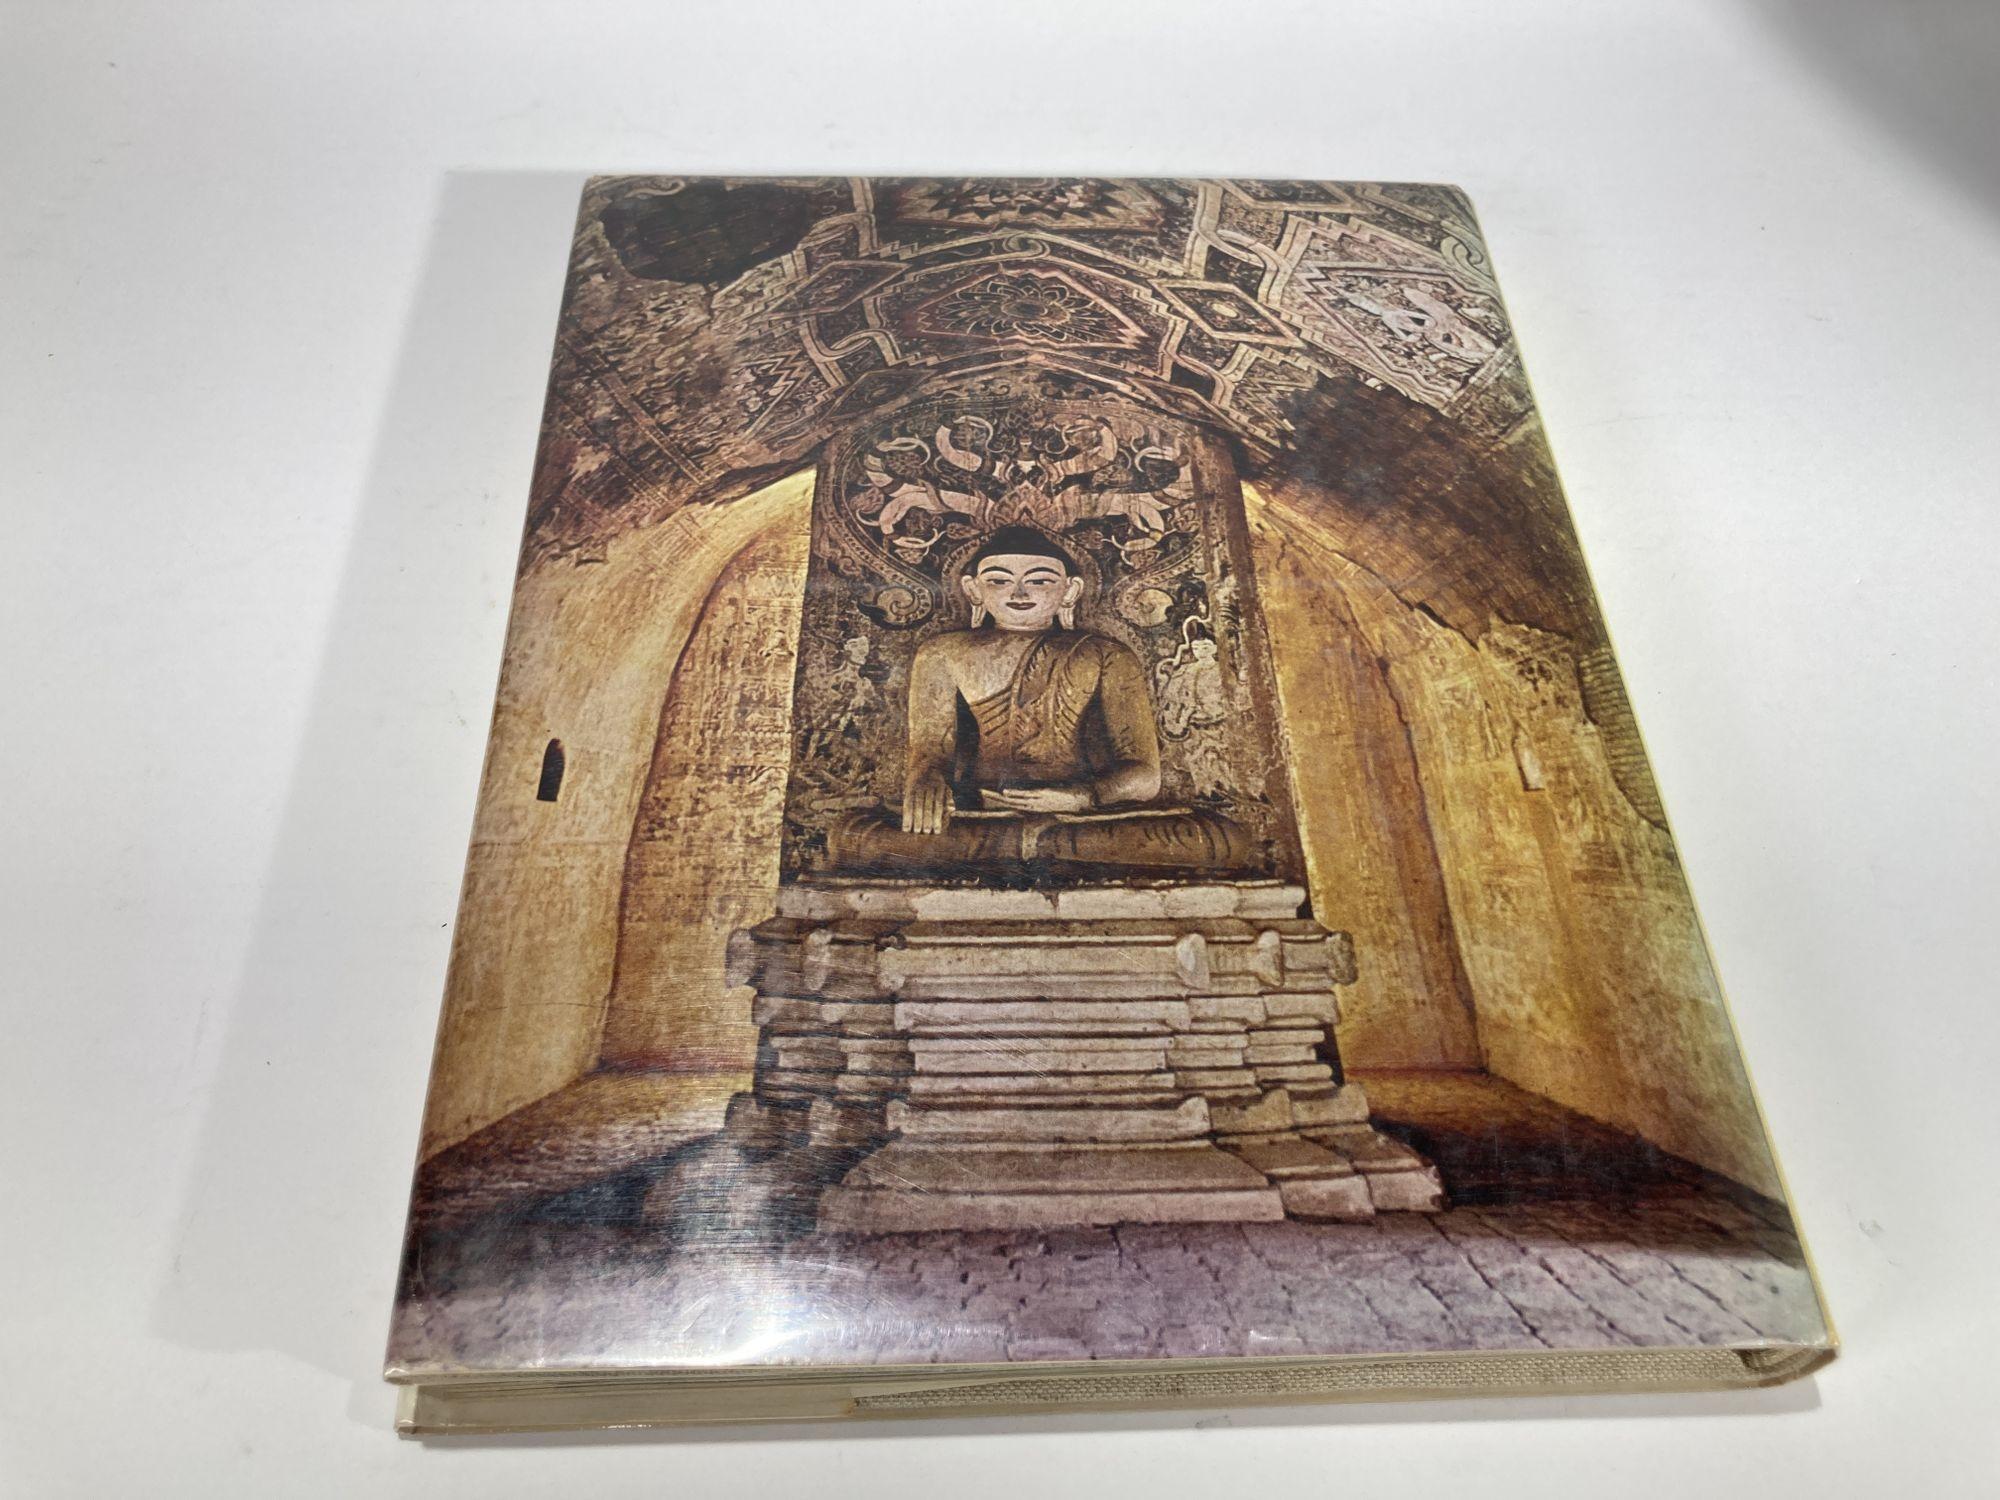 Tibetan Lost Cities of Asia Hardcover Book 1st Edition 1966 by Wim Swaan For Sale